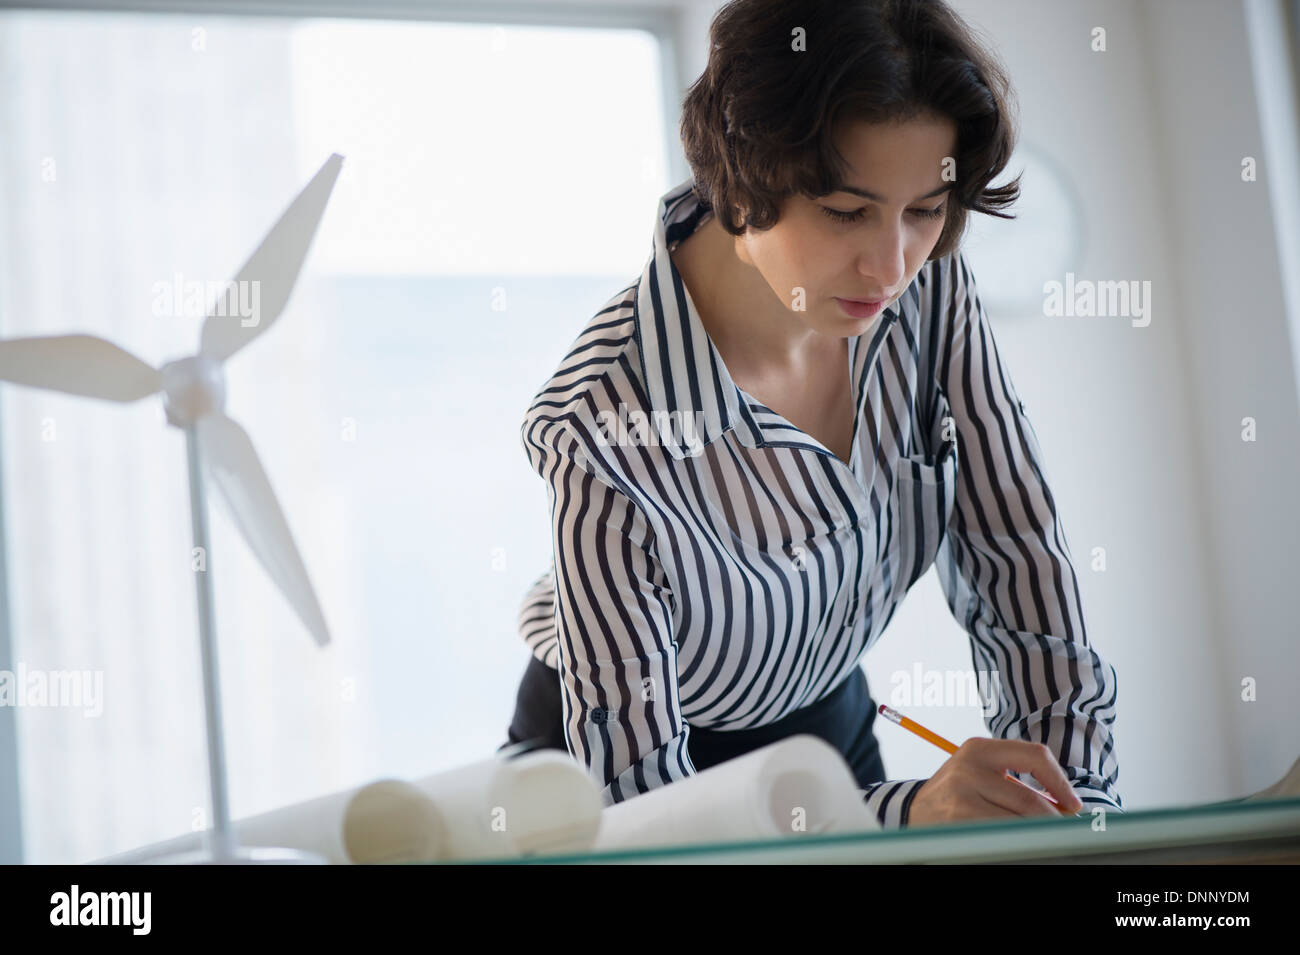 Businesswoman working in office Banque D'Images